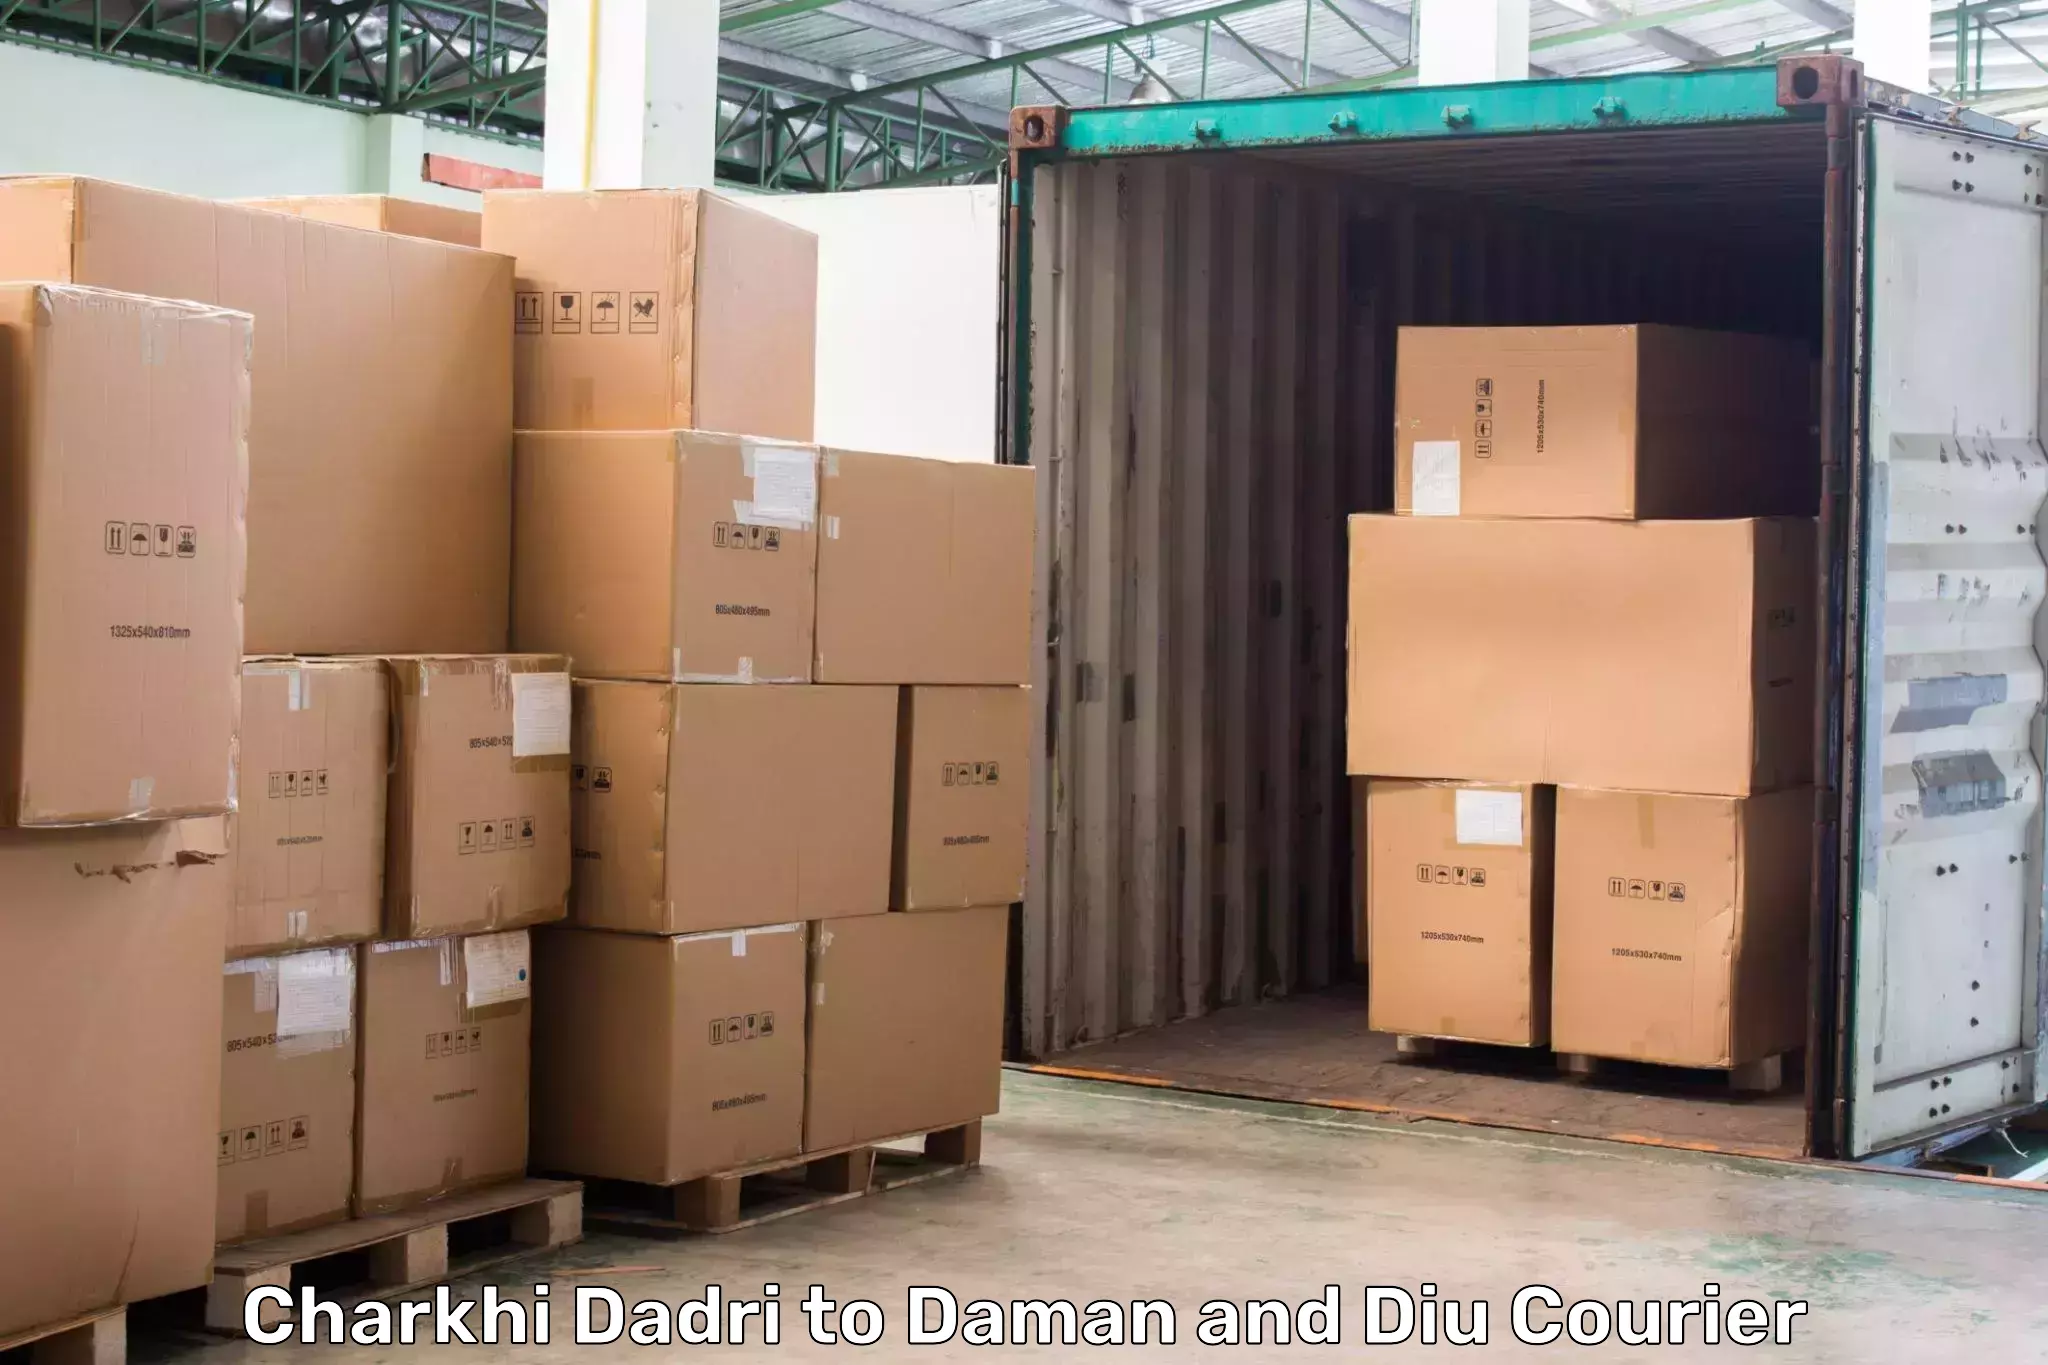 High-speed delivery in Charkhi Dadri to Daman and Diu